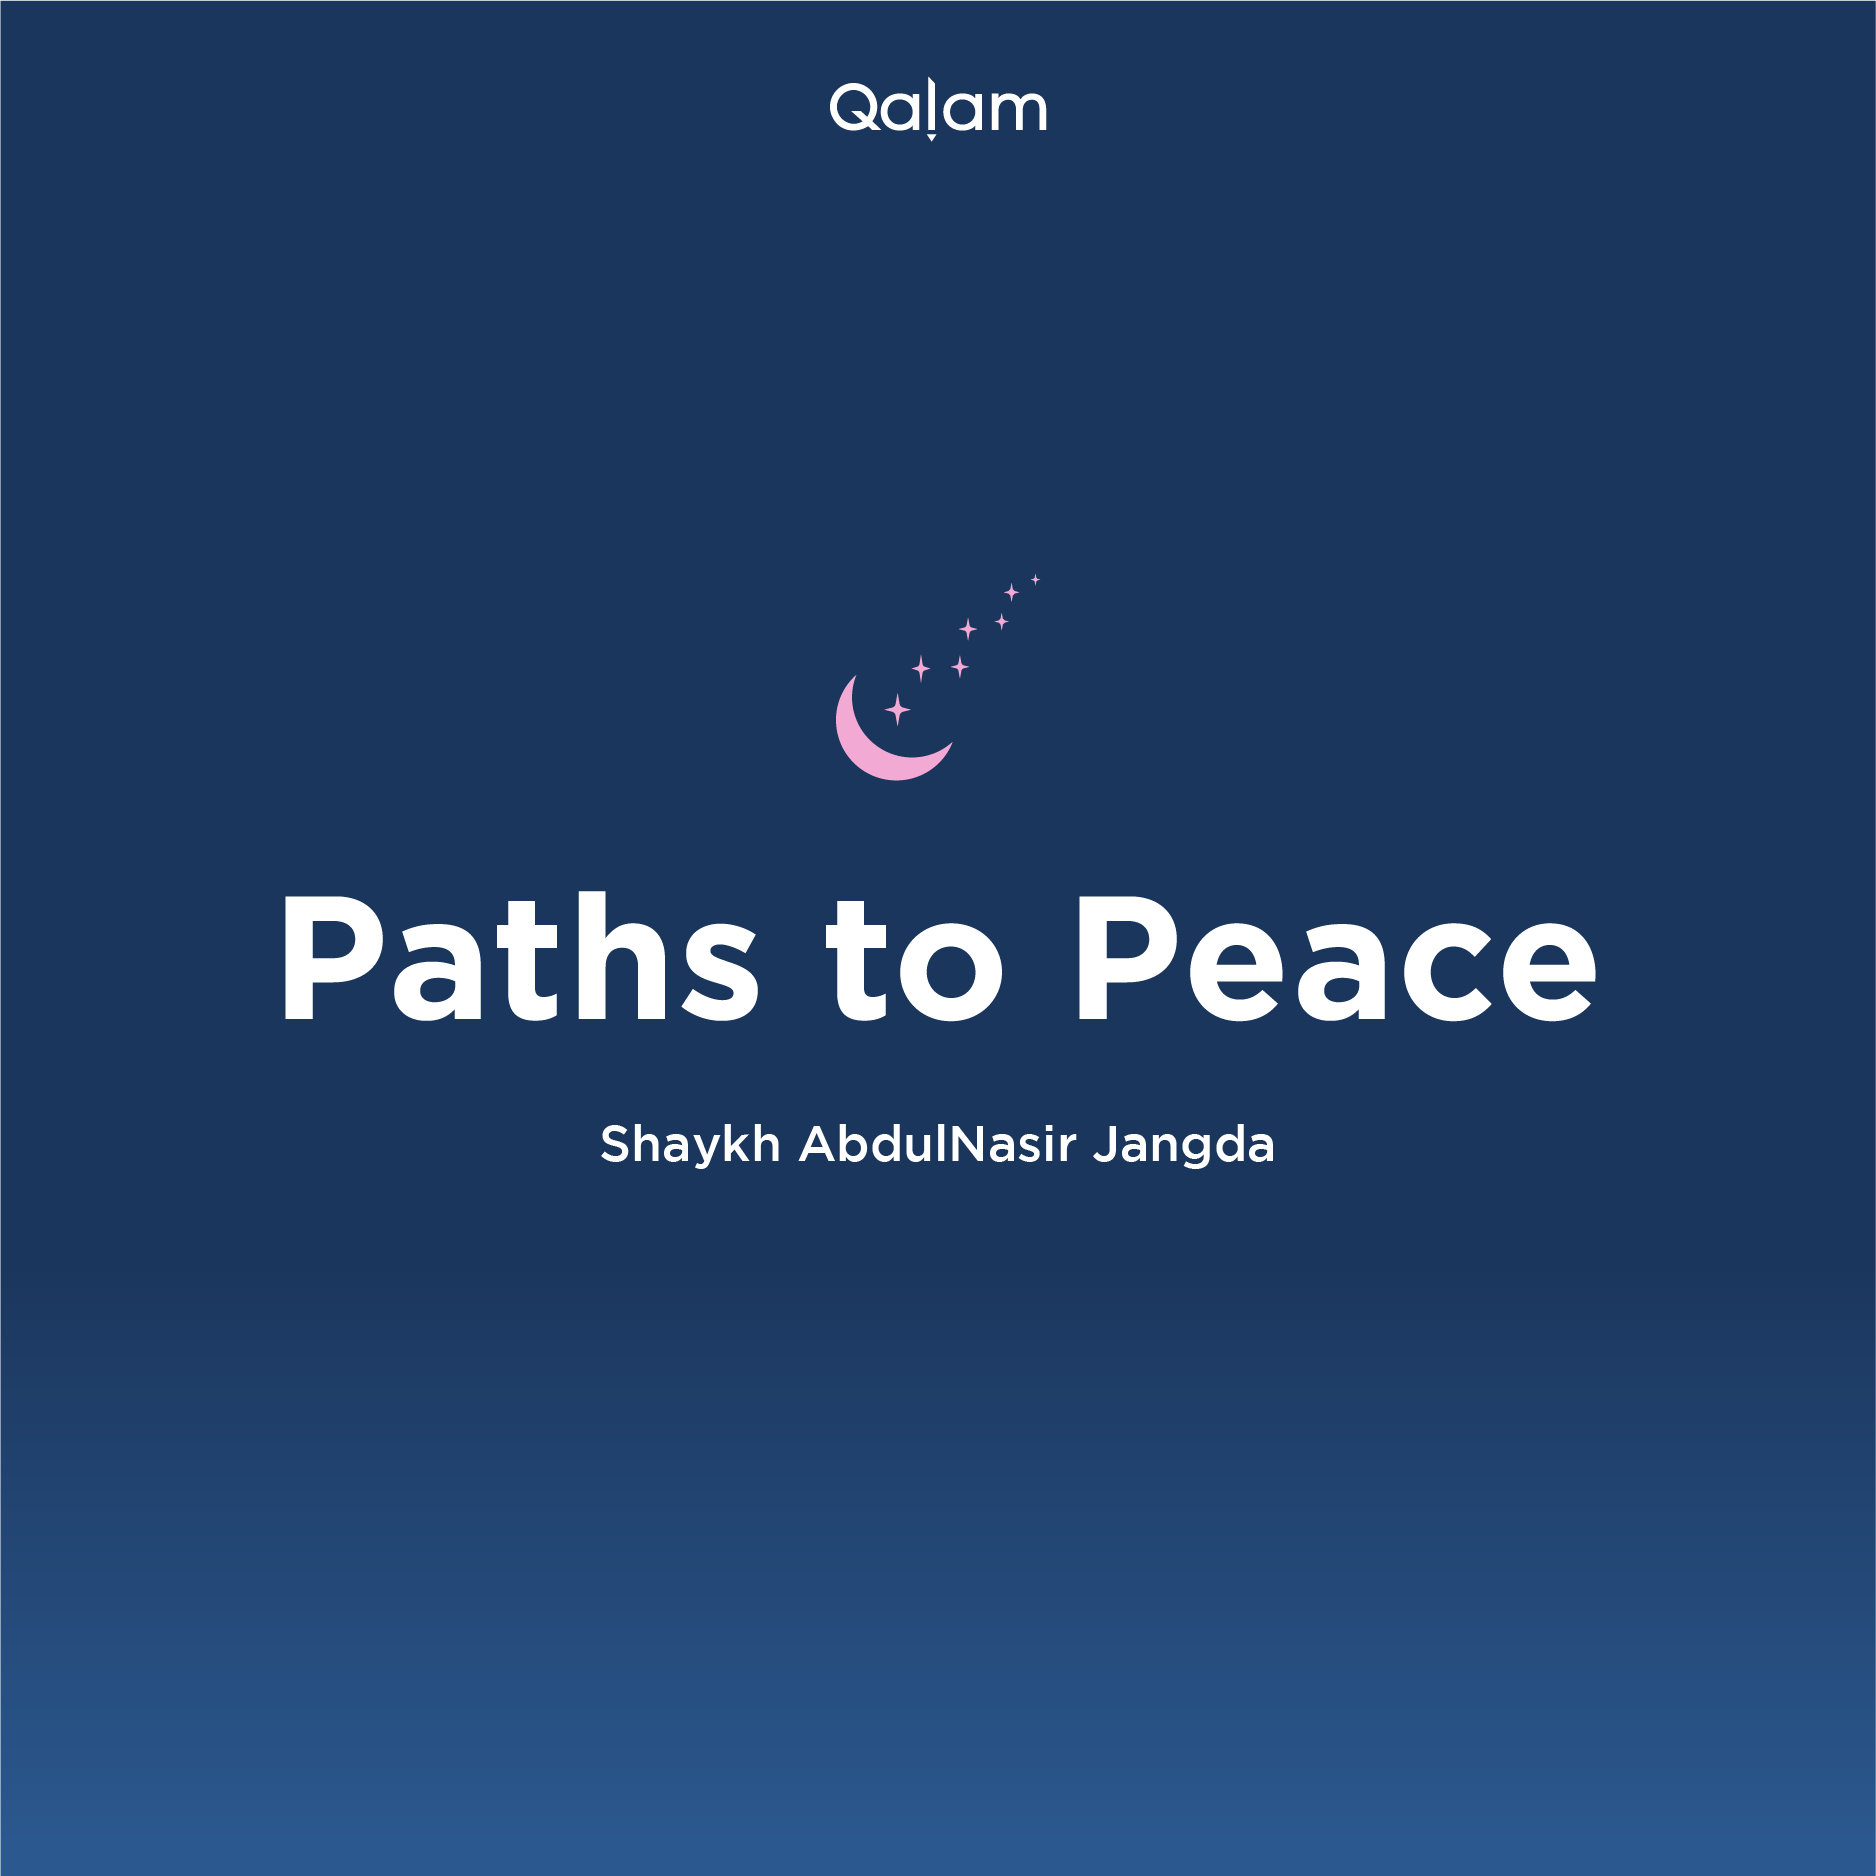 Paths to Peace: EP29